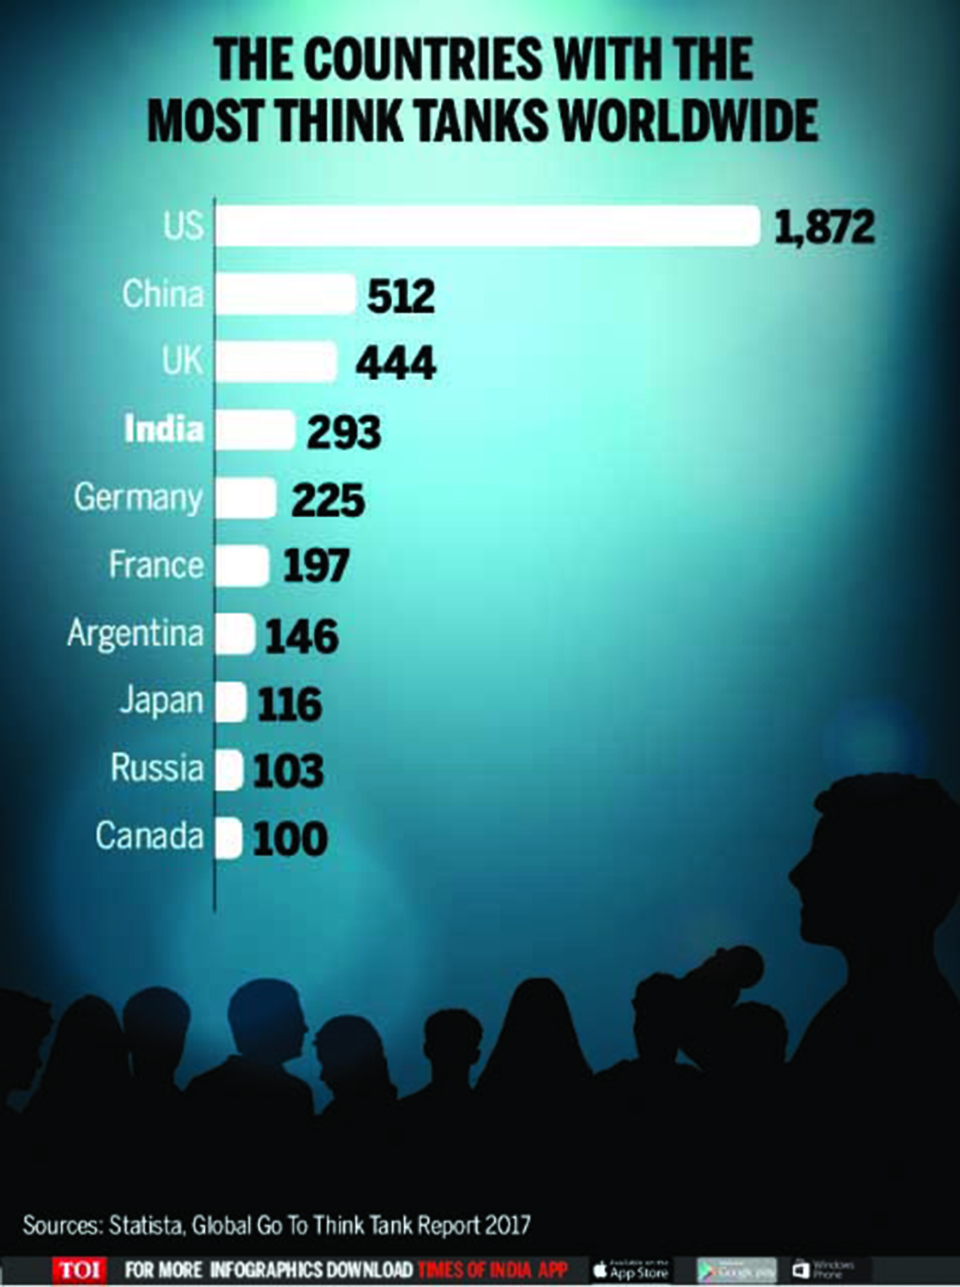 Infographics: India has the fourth largest number of think tanks